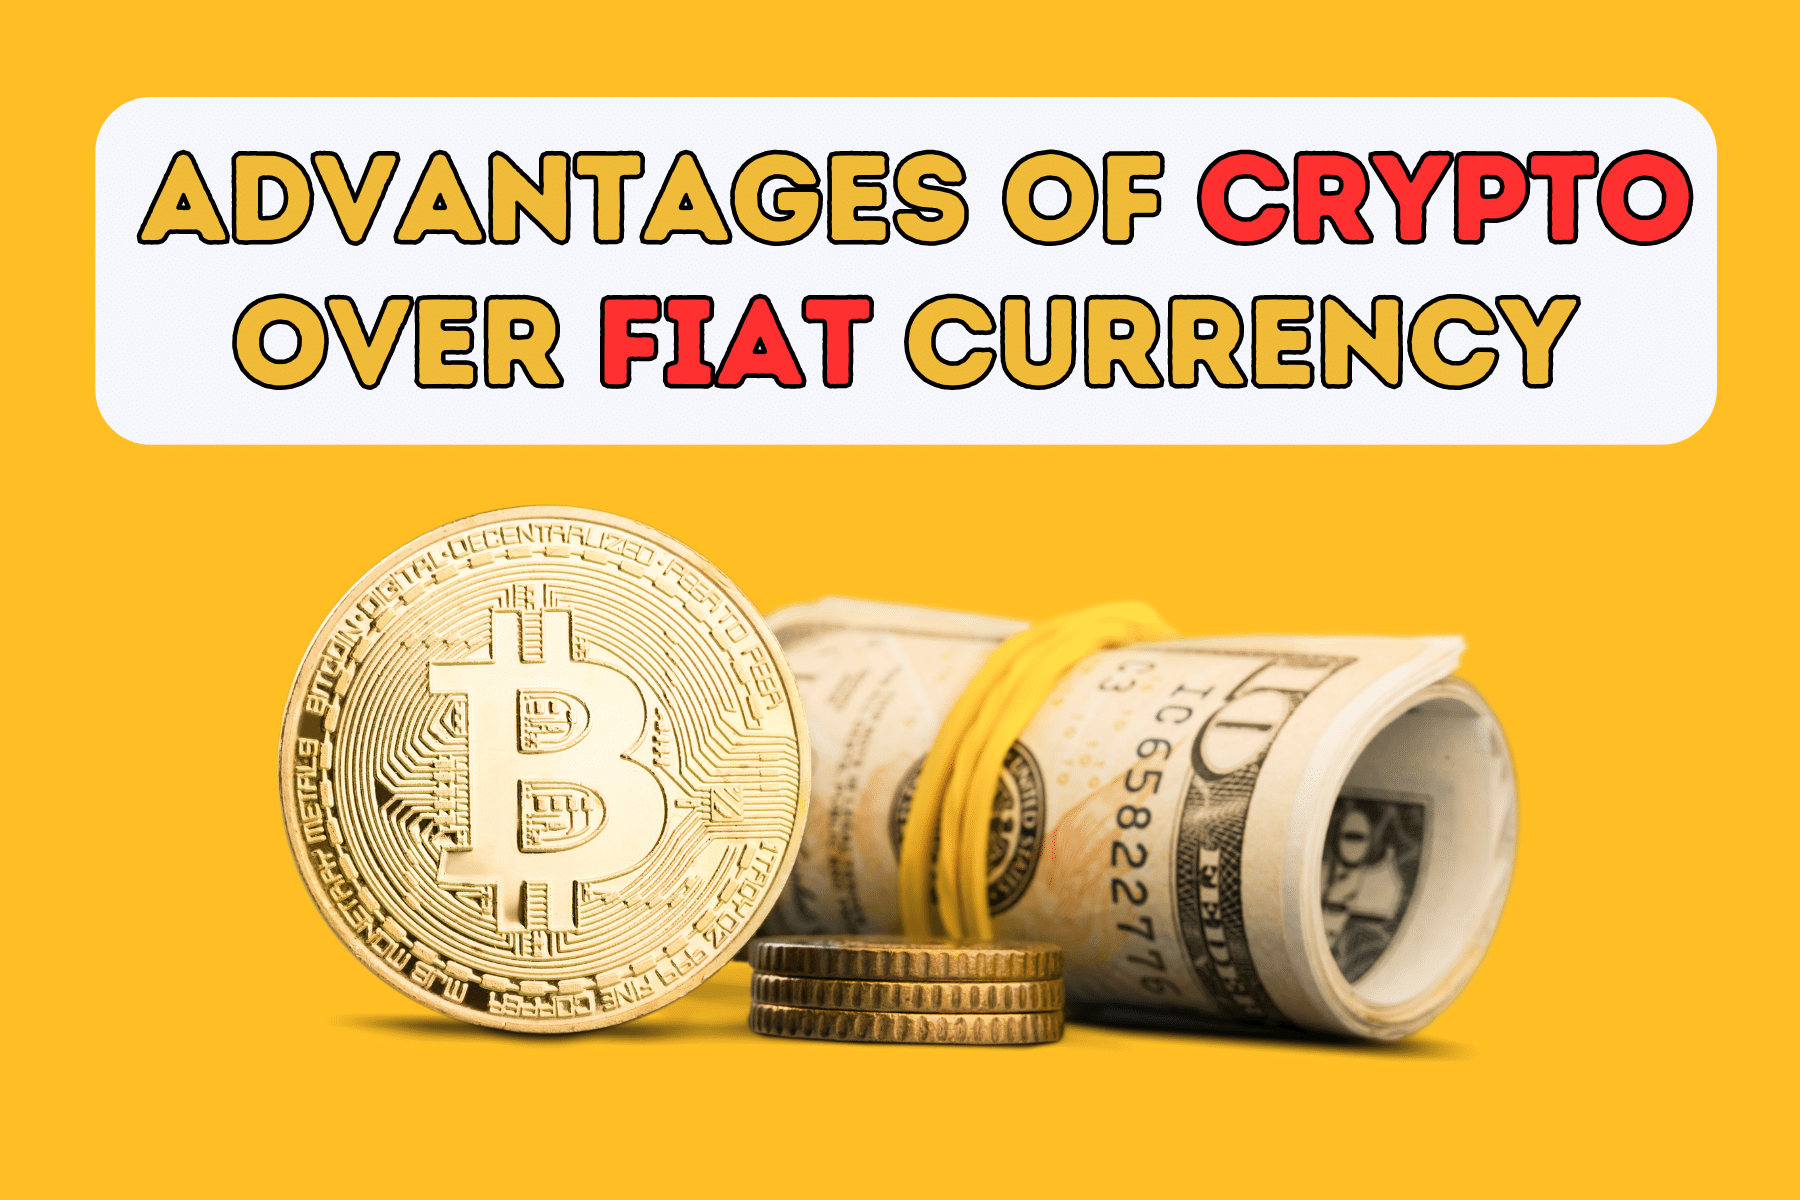 Advantages of Cryptocurrency over Fiat Currency